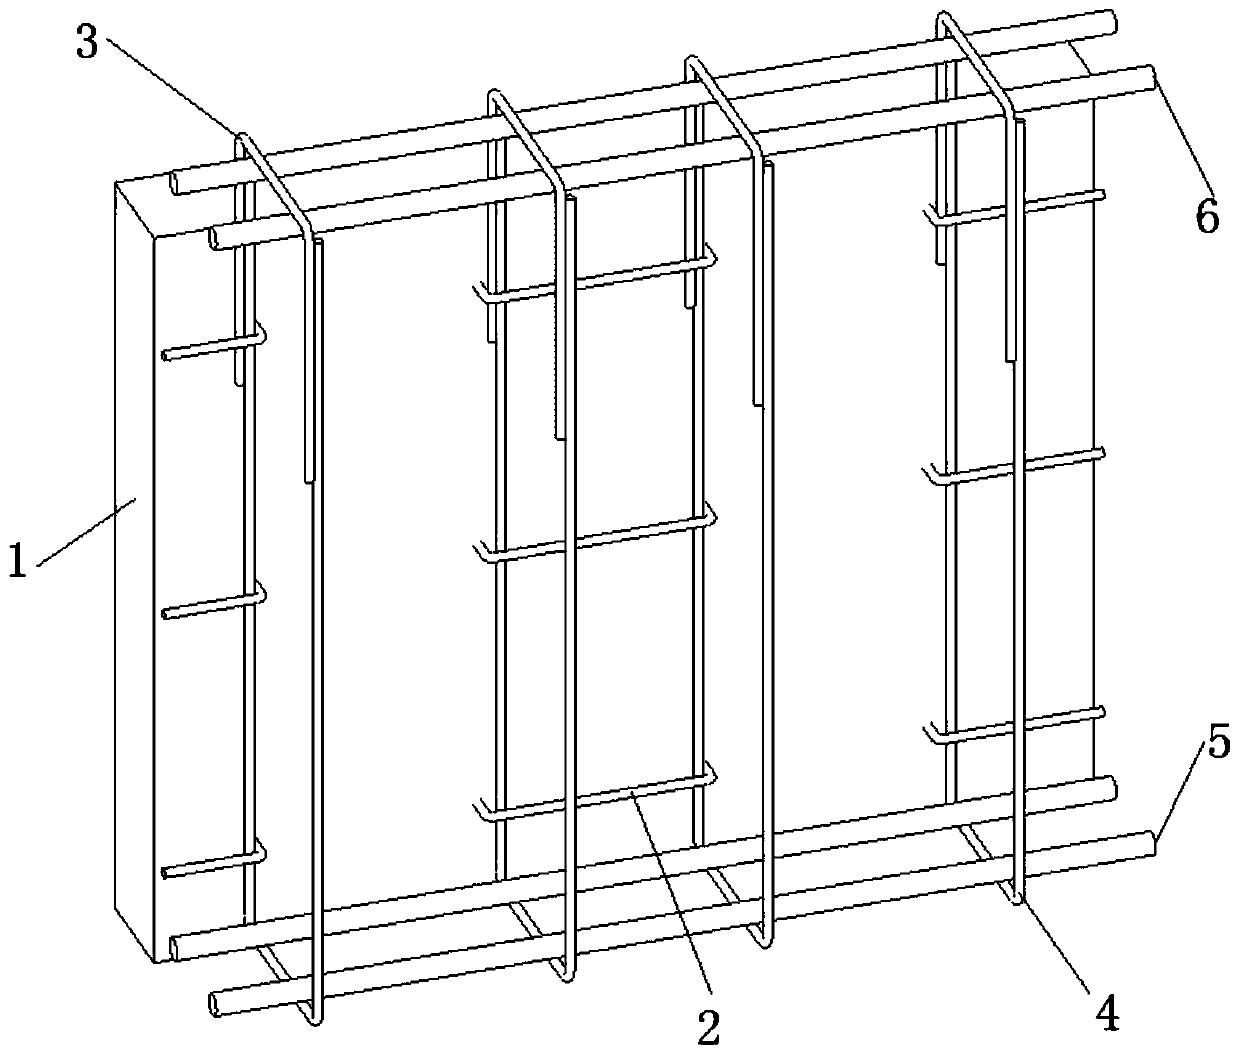 Fabricated cast-in-place combined beam structure